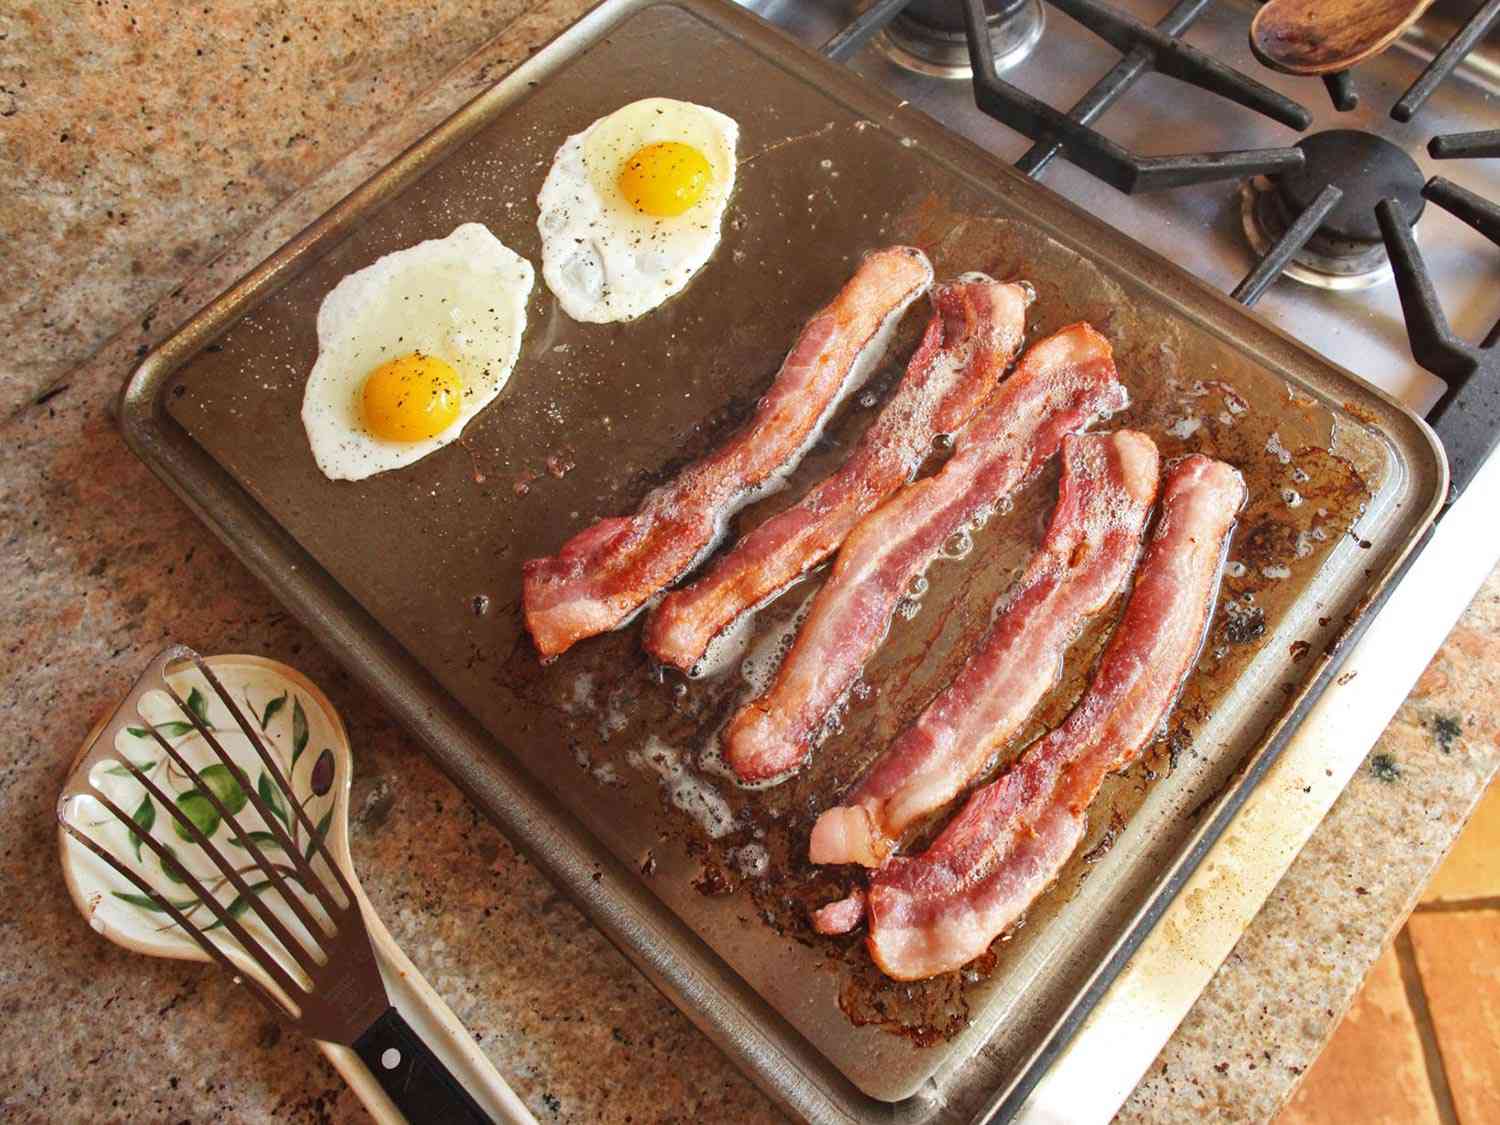 Bacon and eggs on the Baking Griddle